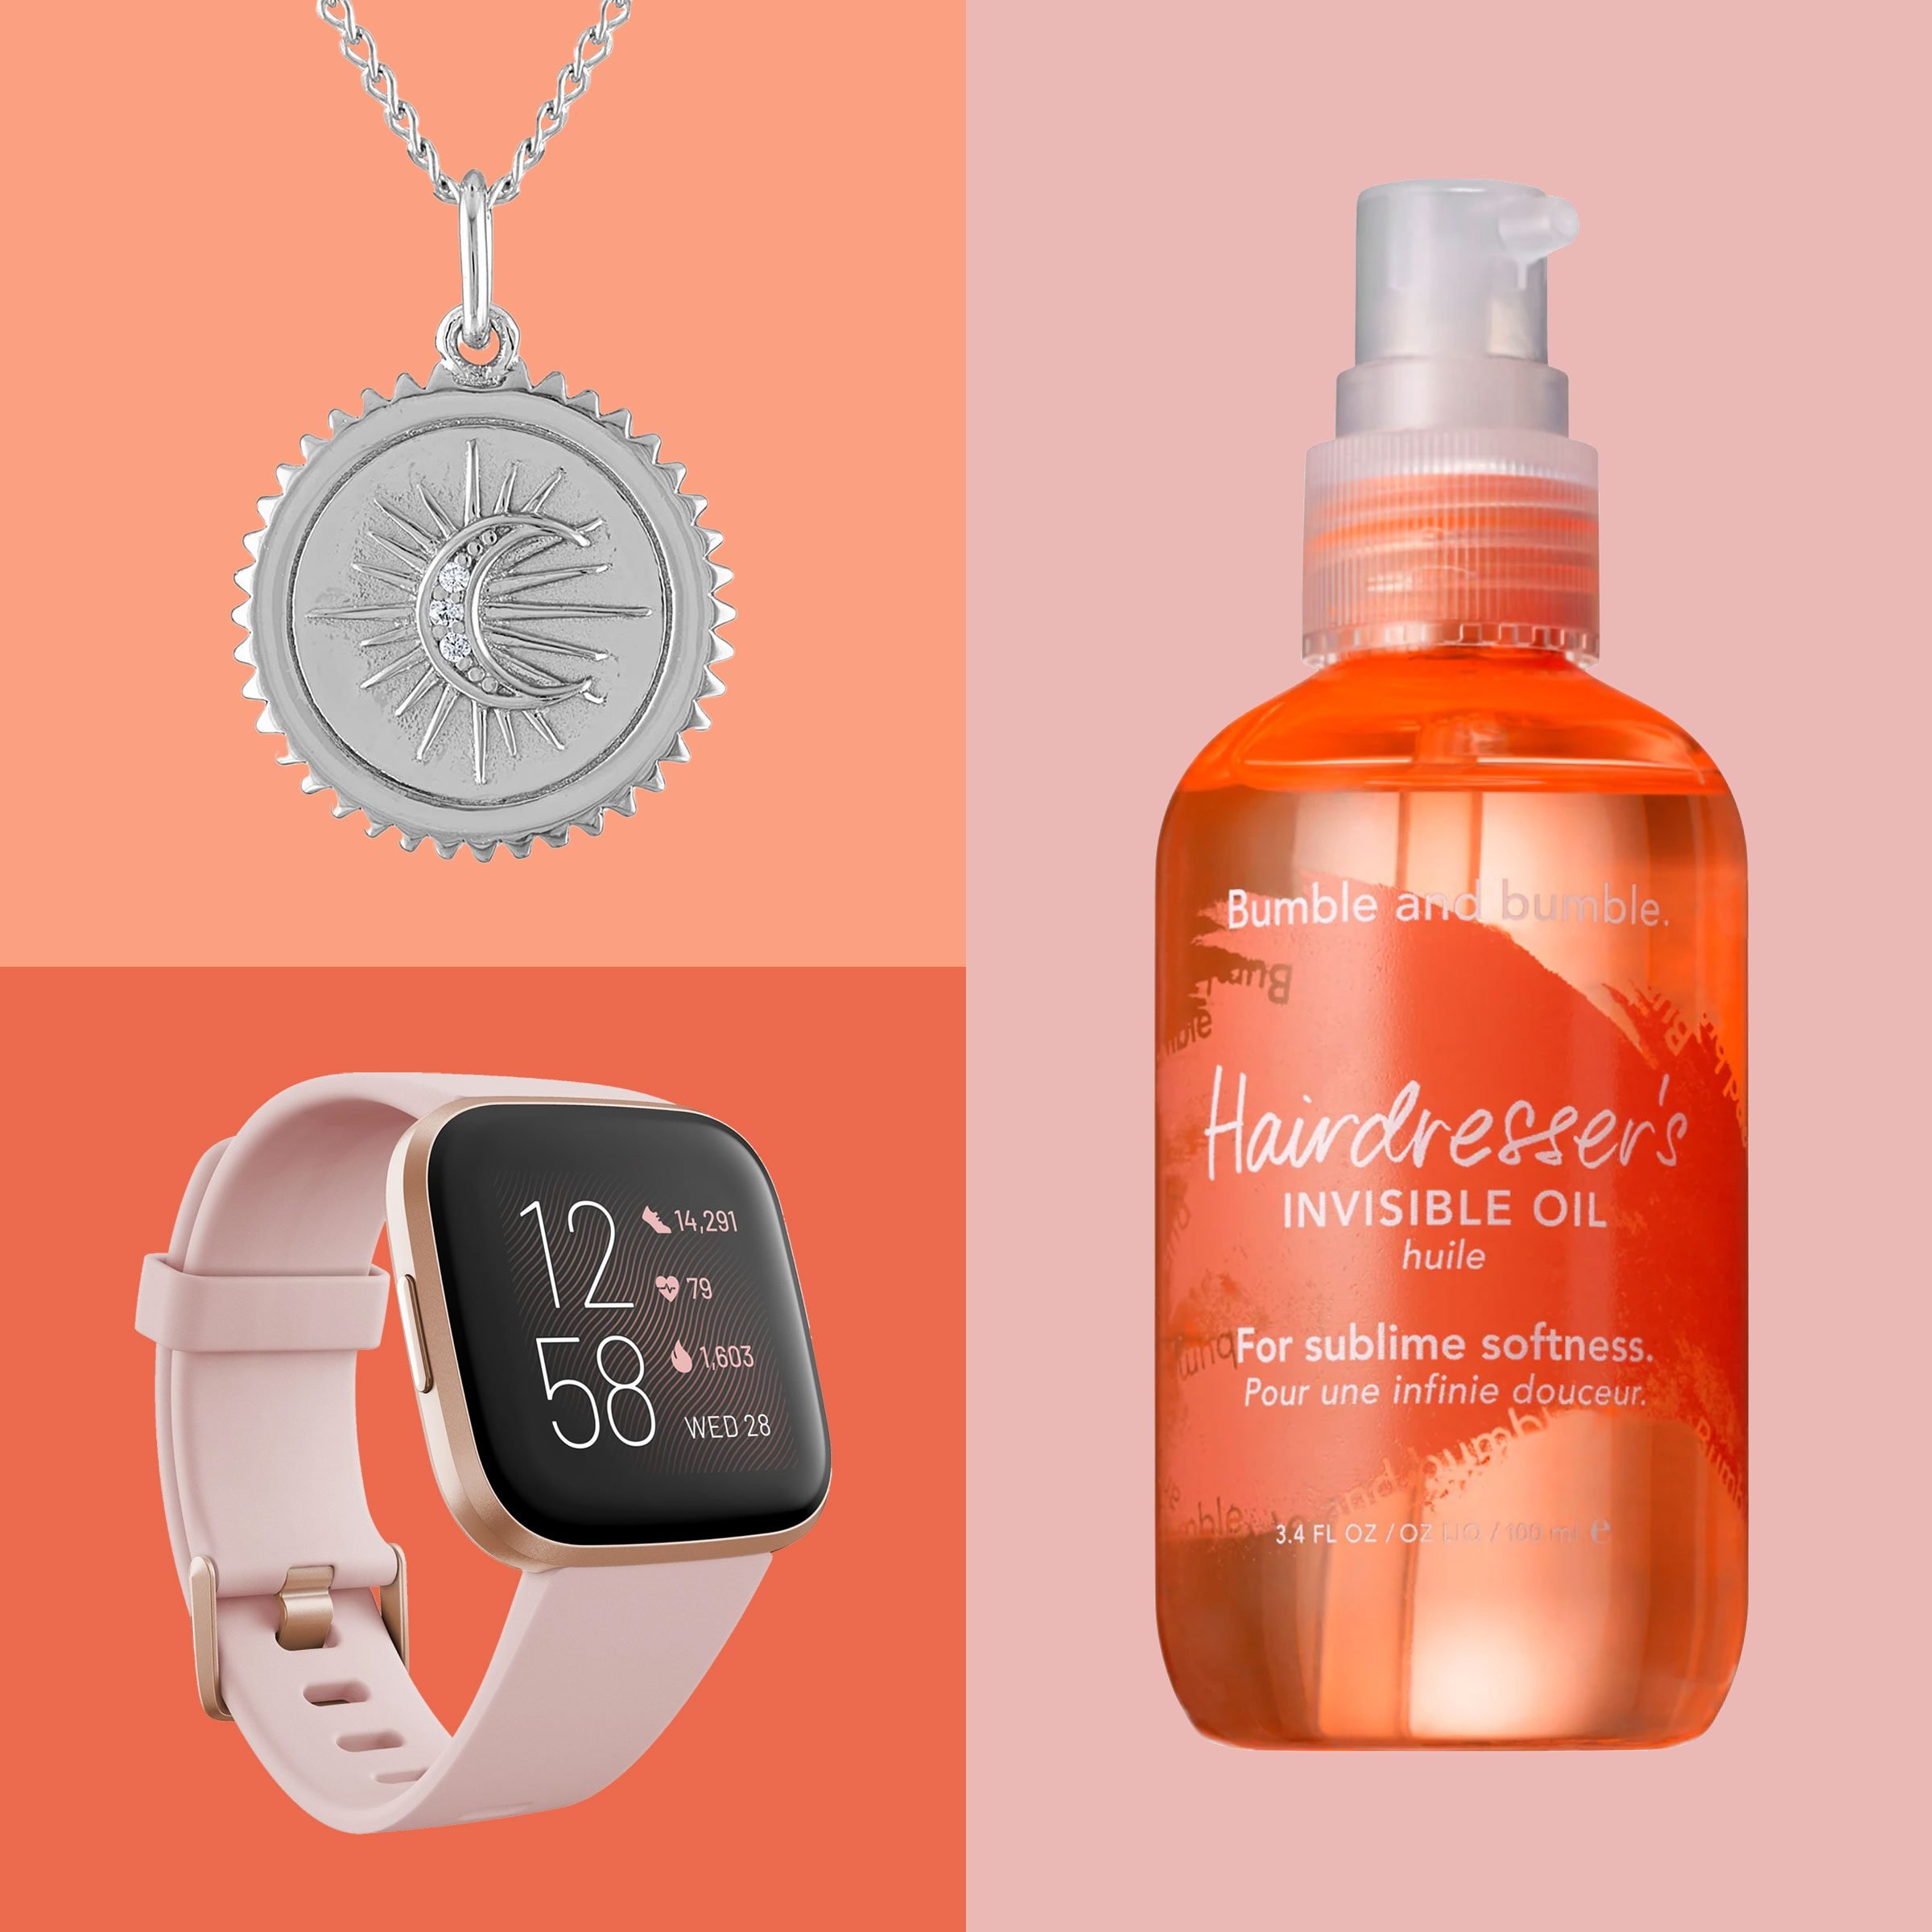 39 Fitness Gifts for Her: Favorite Healthy Gift Ideas